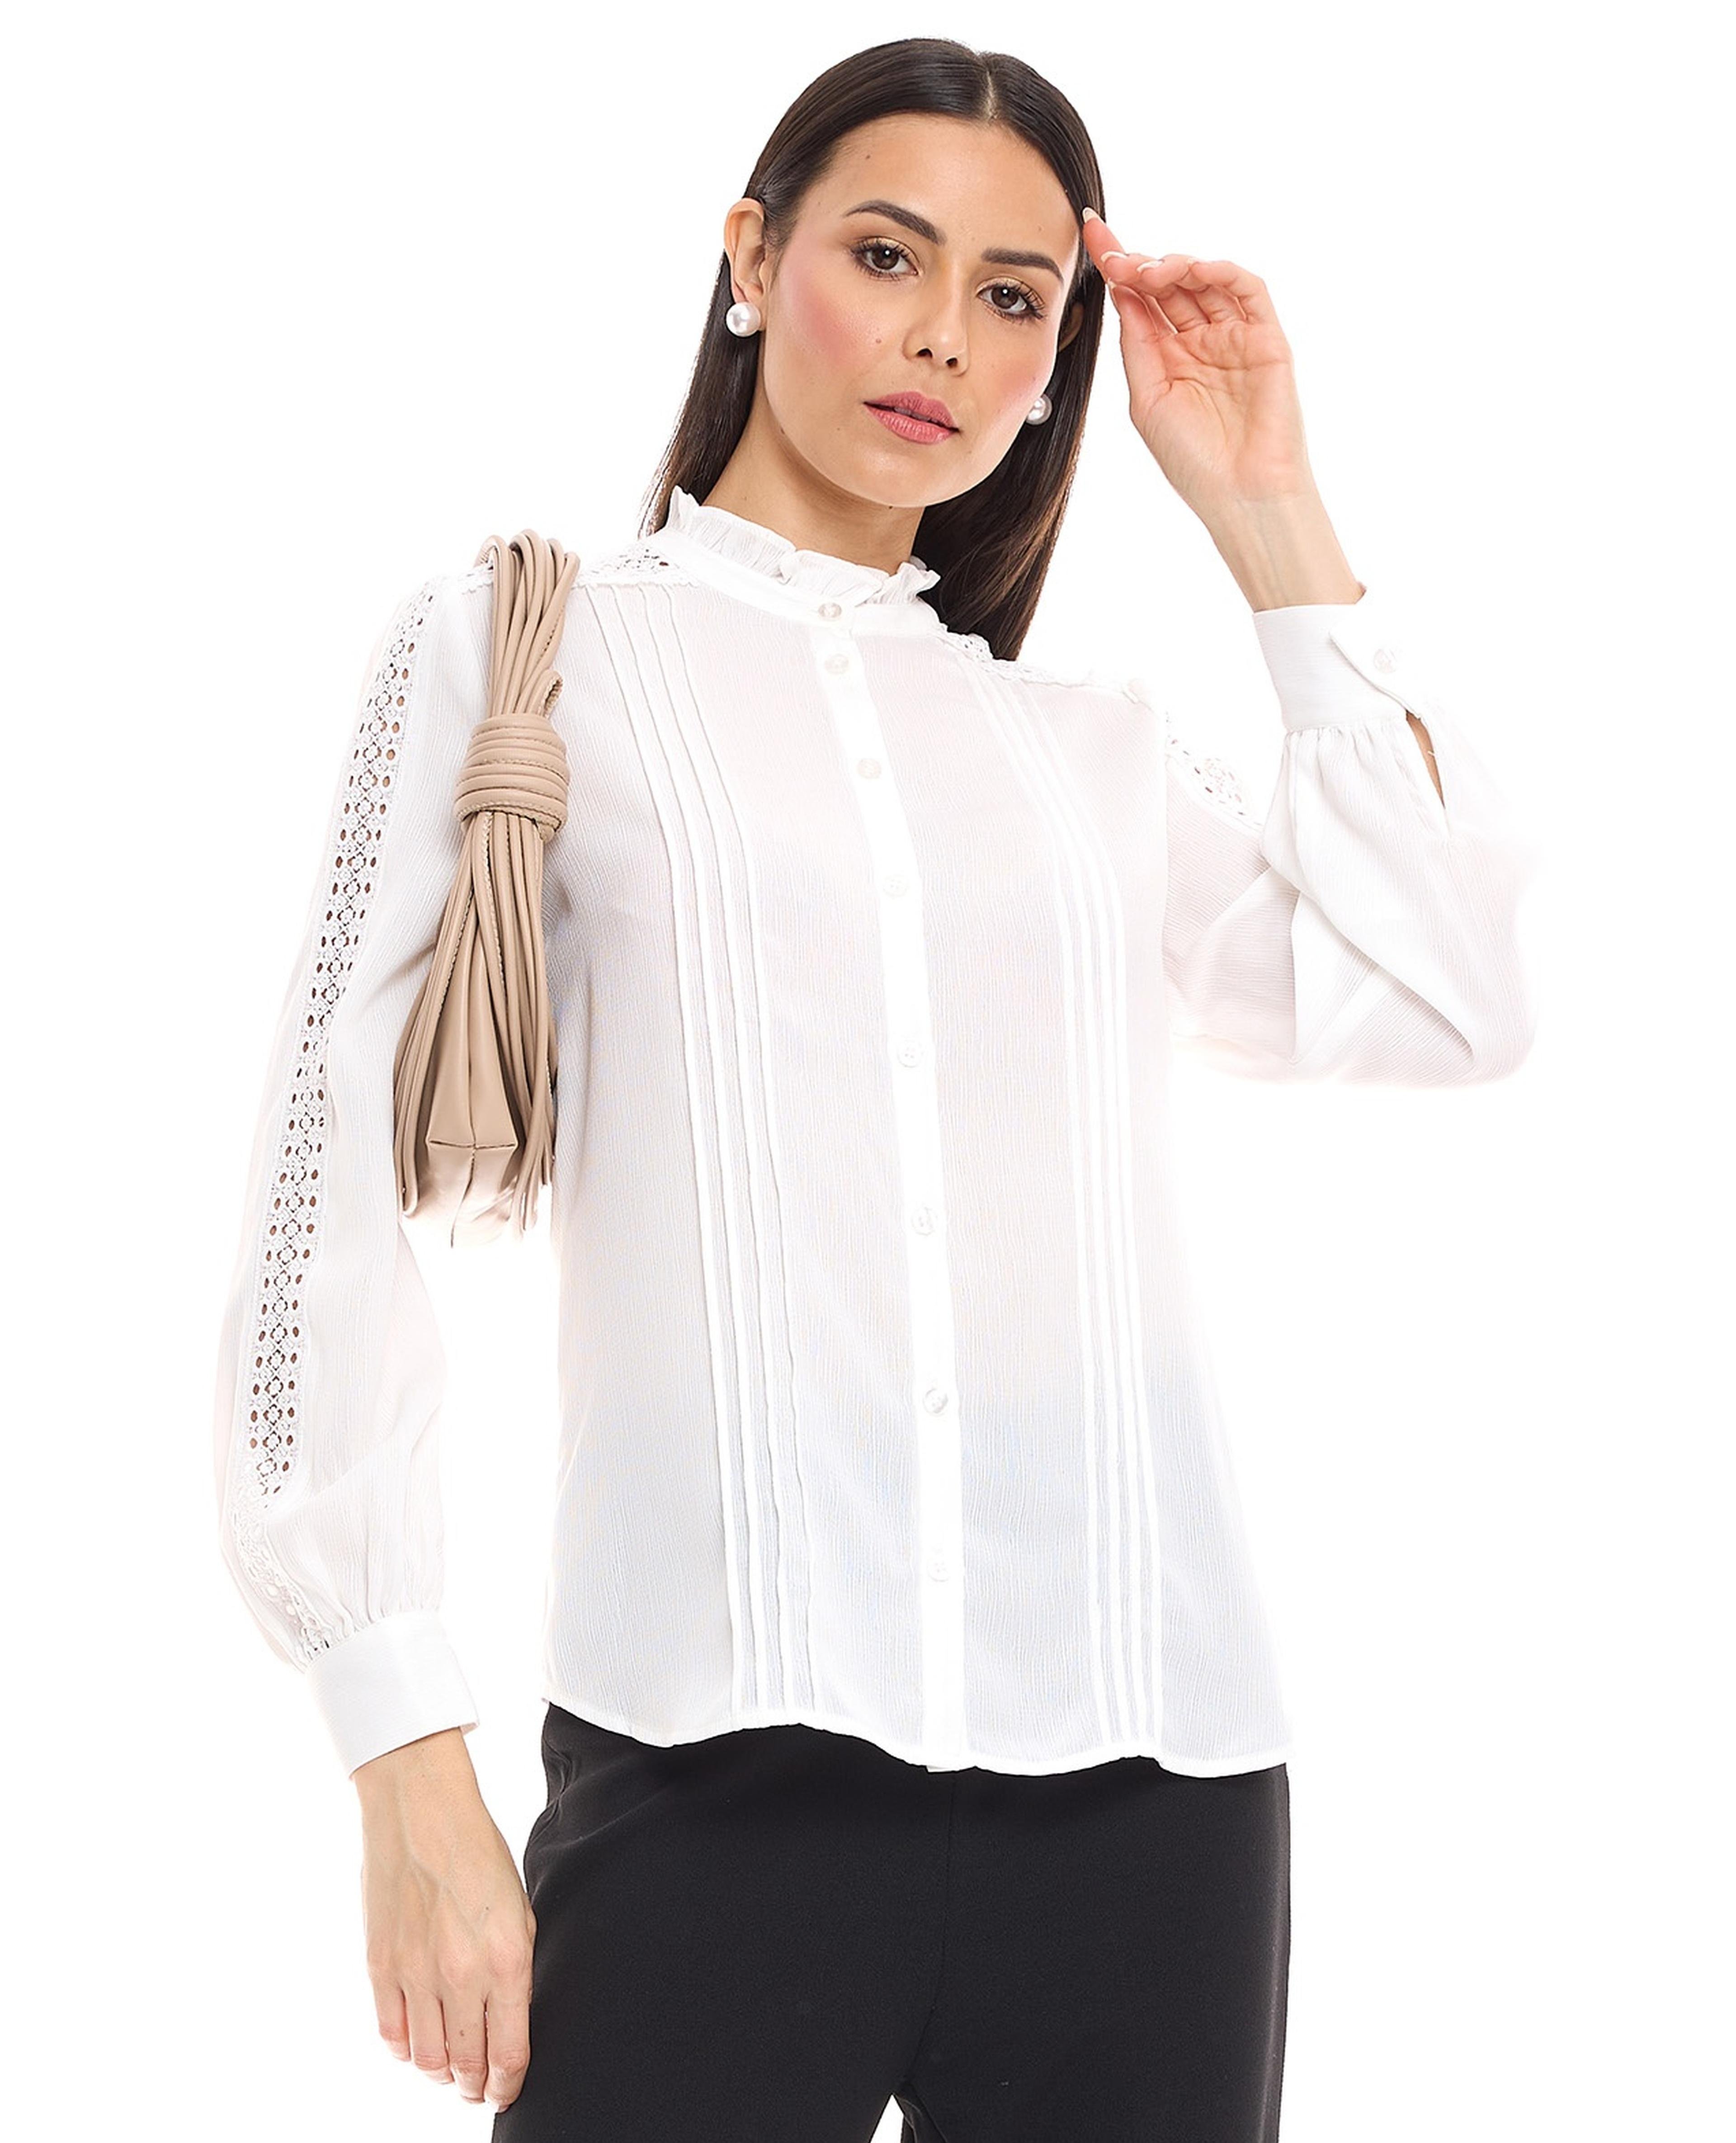 Lace Trim Top with Ruffle Neck and Bishop Sleeves